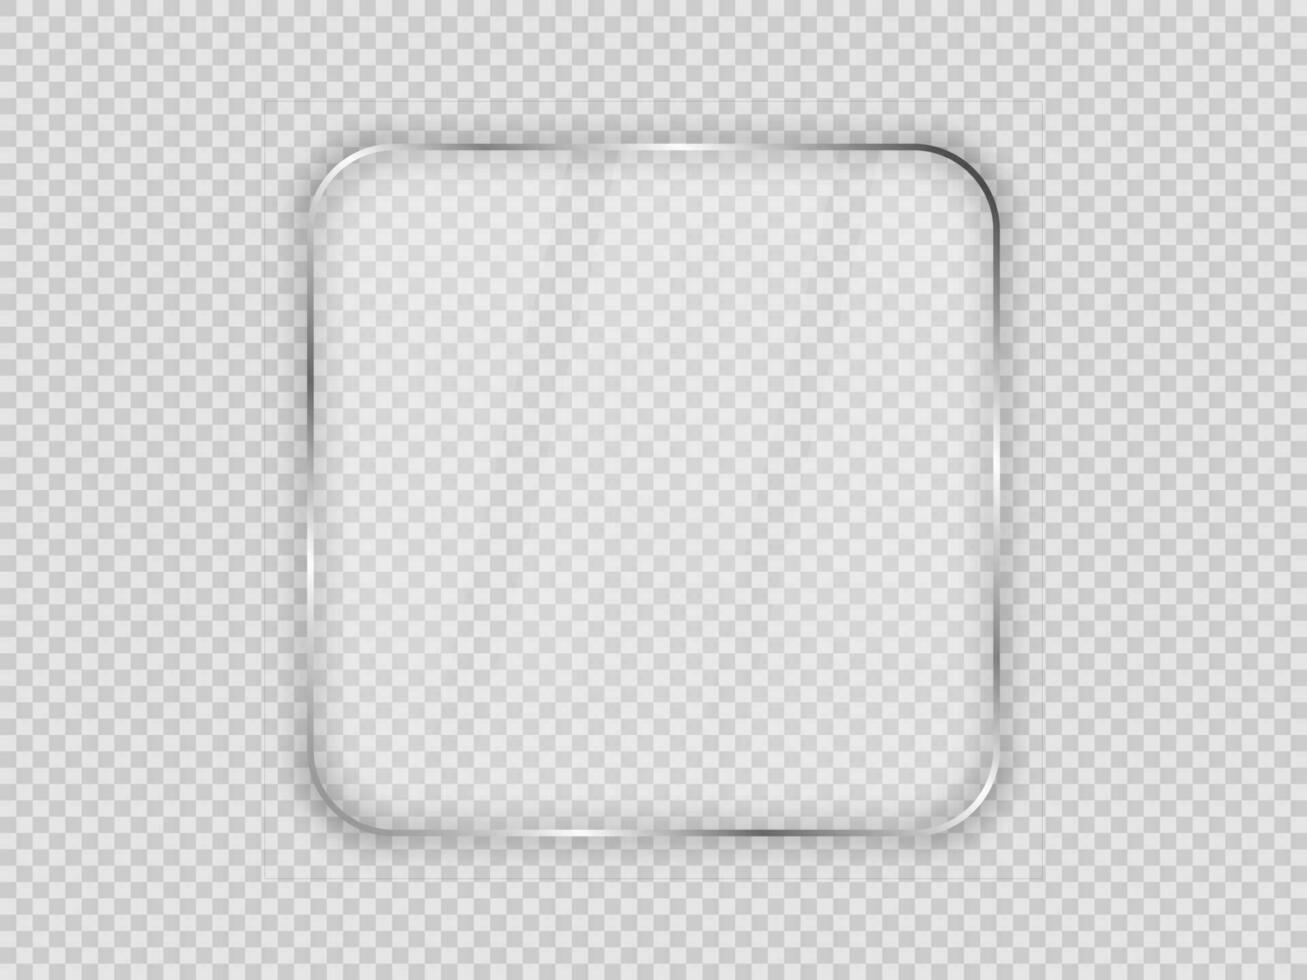 Glass plate in rounded square frame vector